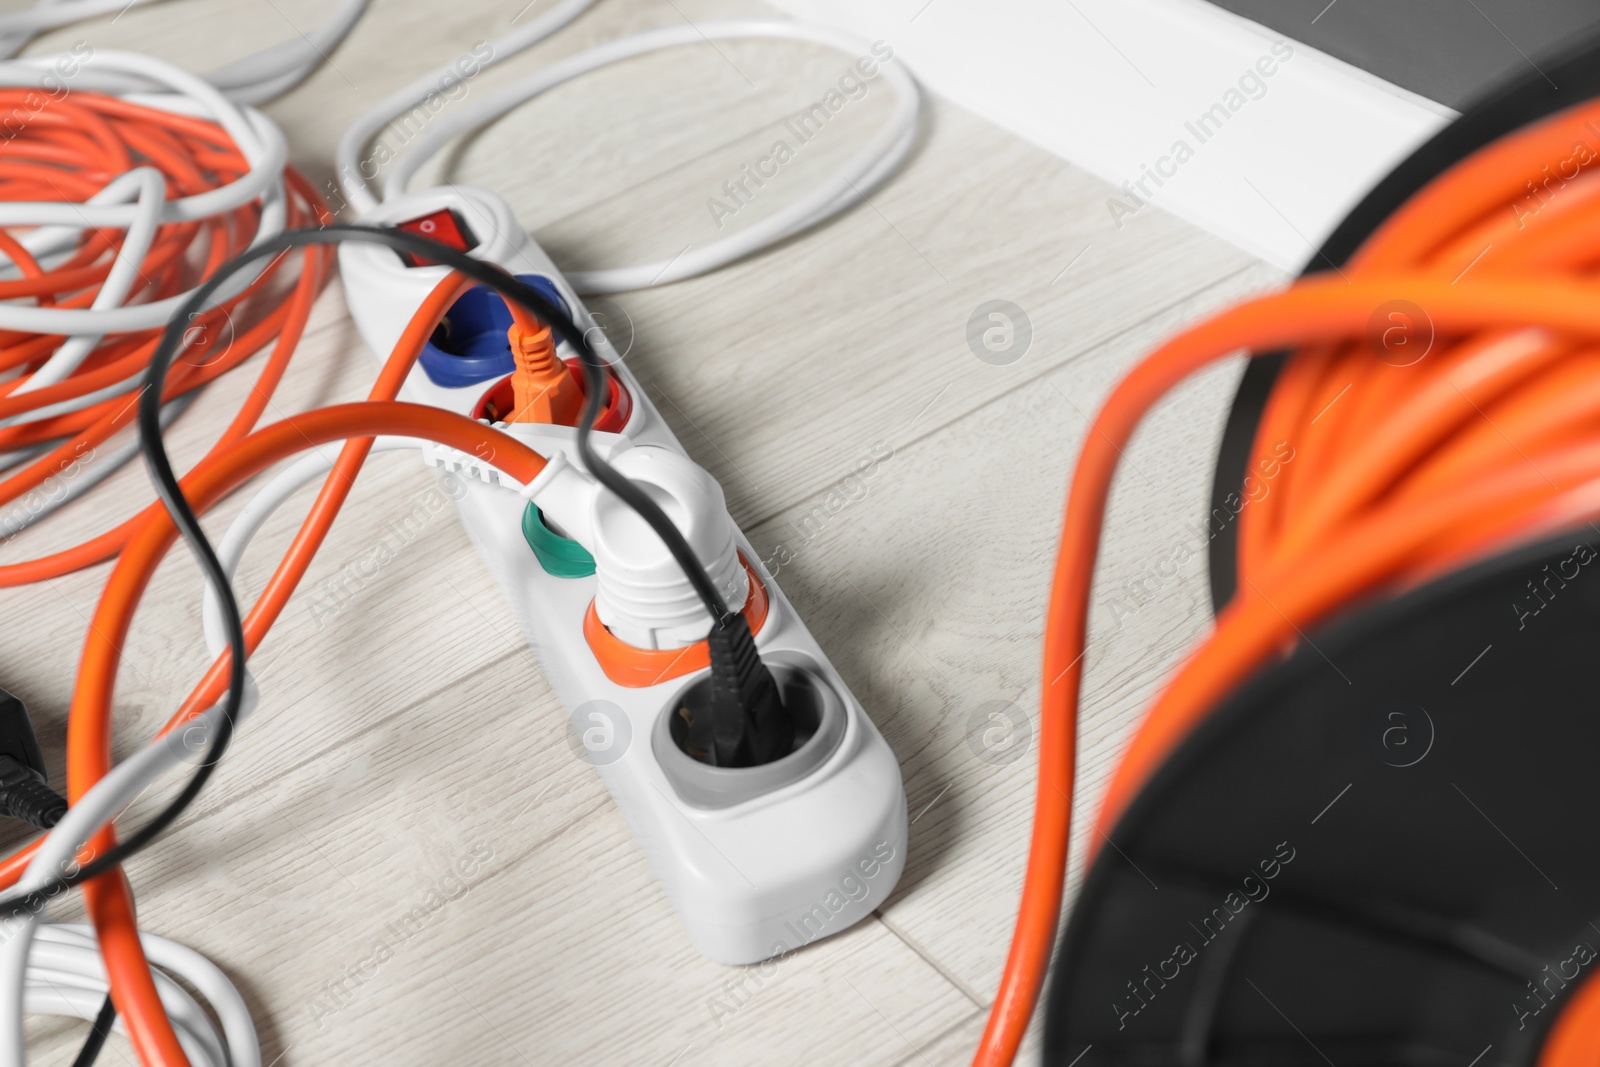 Photo of Power strip with different electrical plugs on white laminated floor, closeup